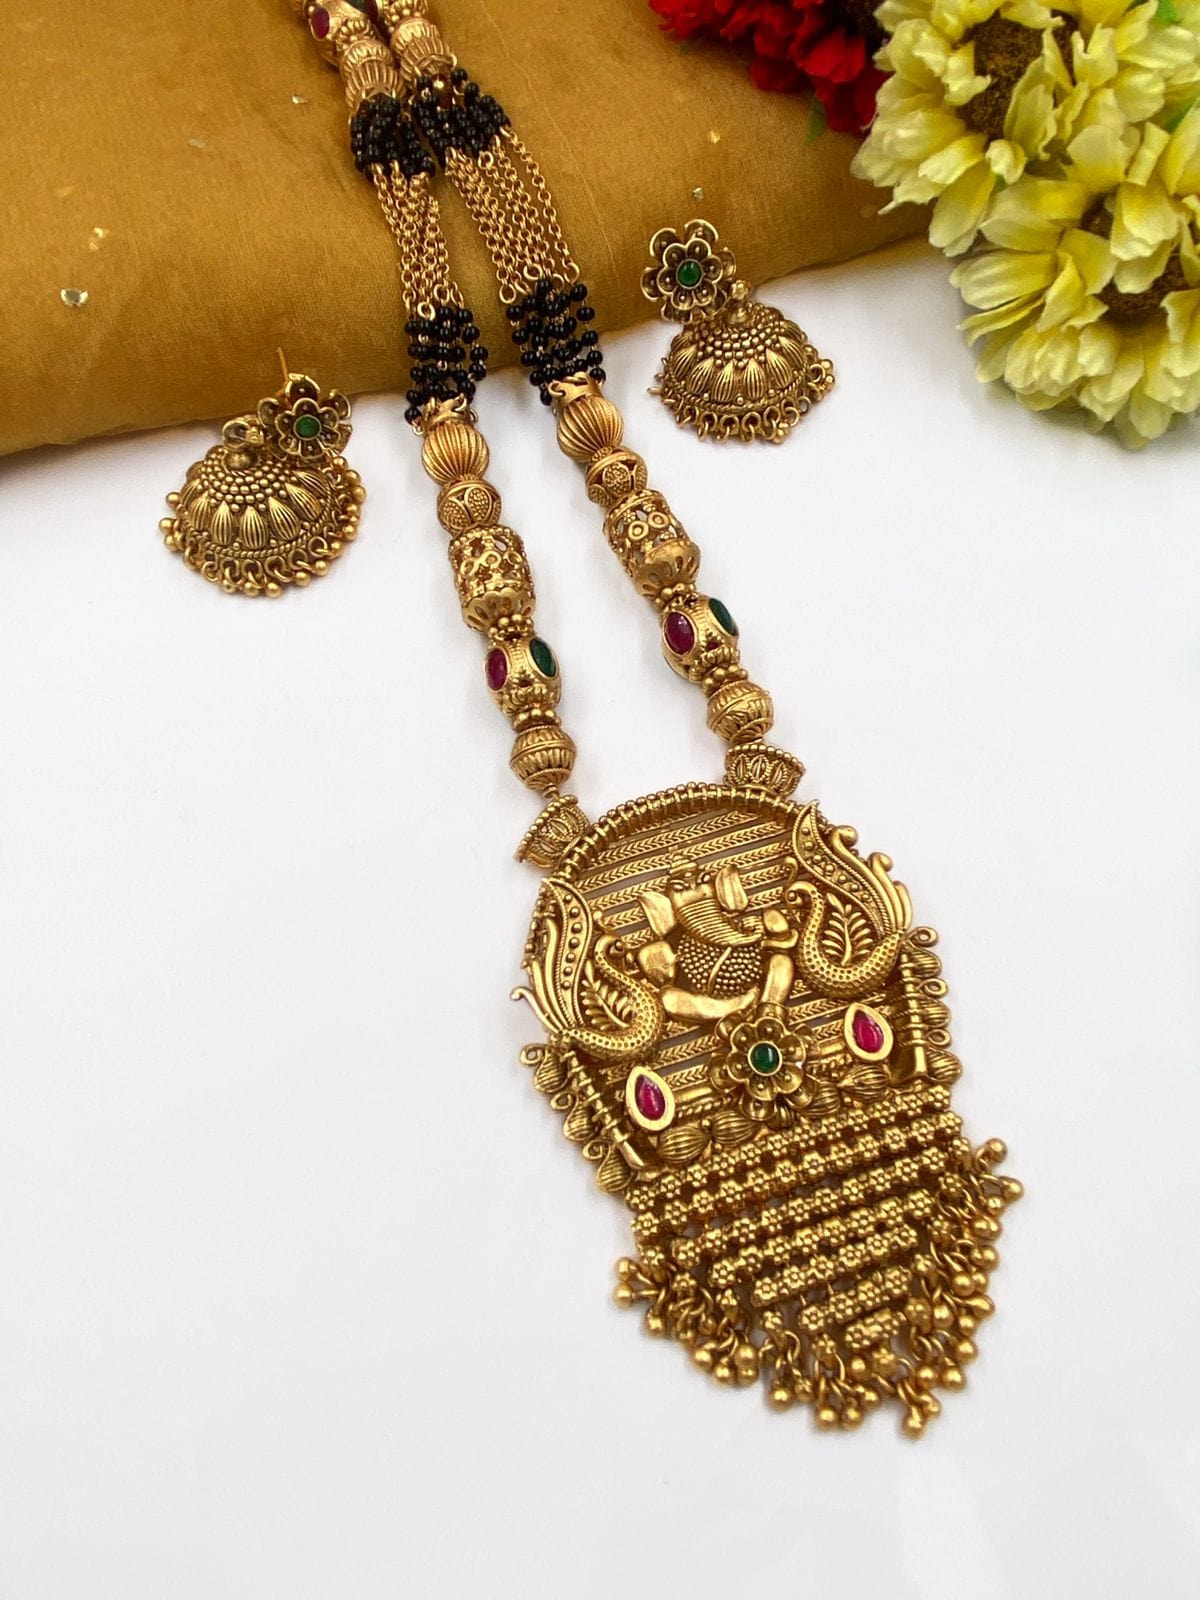 South Indian Lord Ganesha Temple Mangalsutra Necklace Set By Gehna Shop Mangalsutras